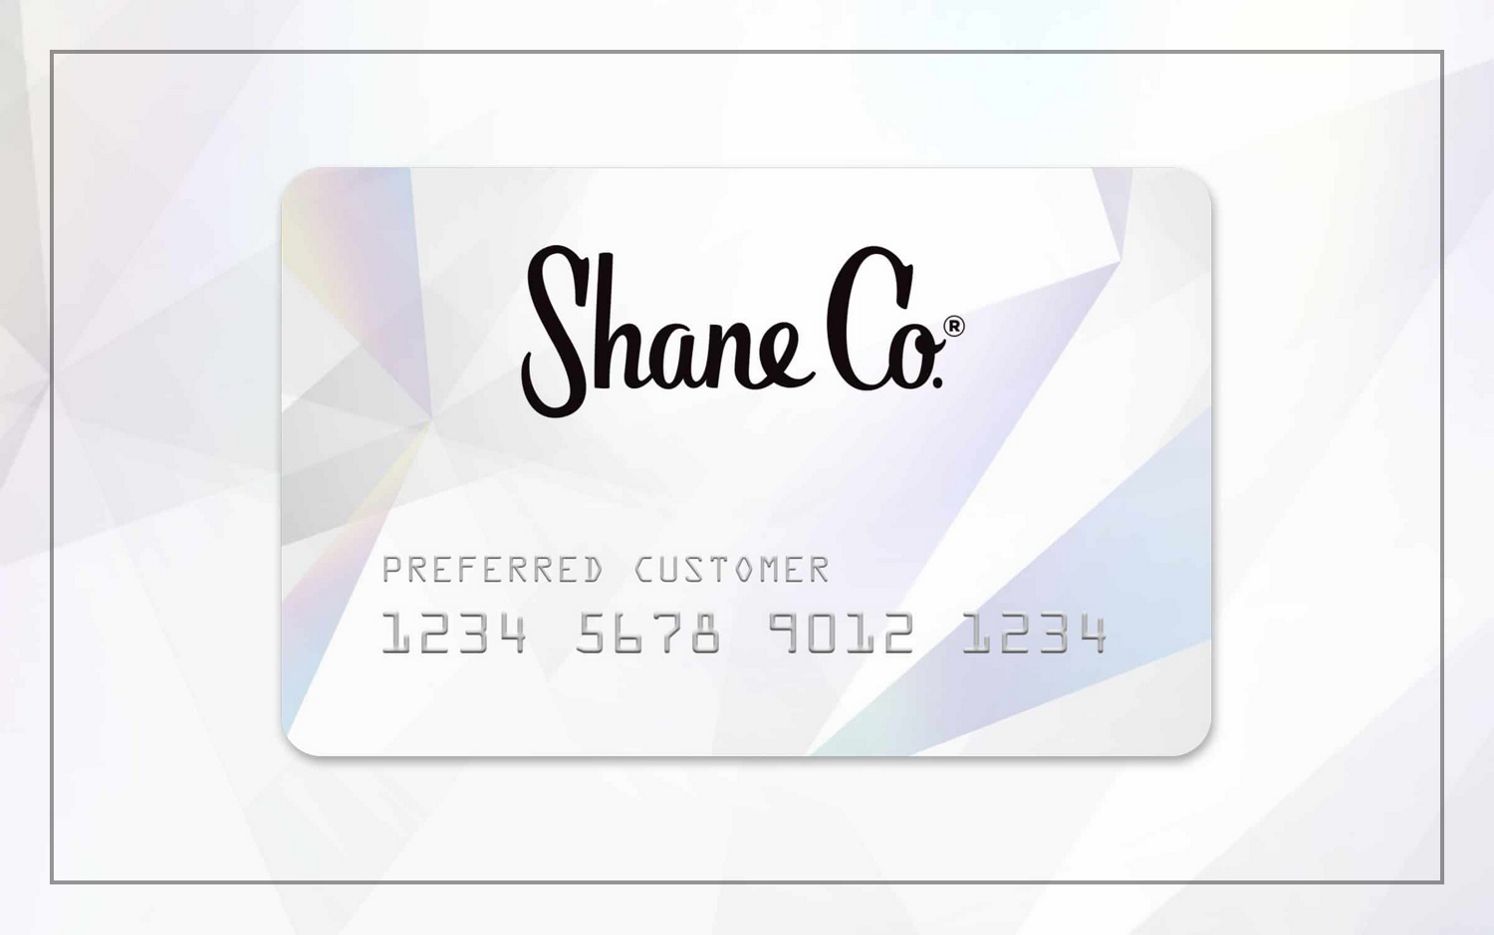 An image of a Shane Co. Credit Card